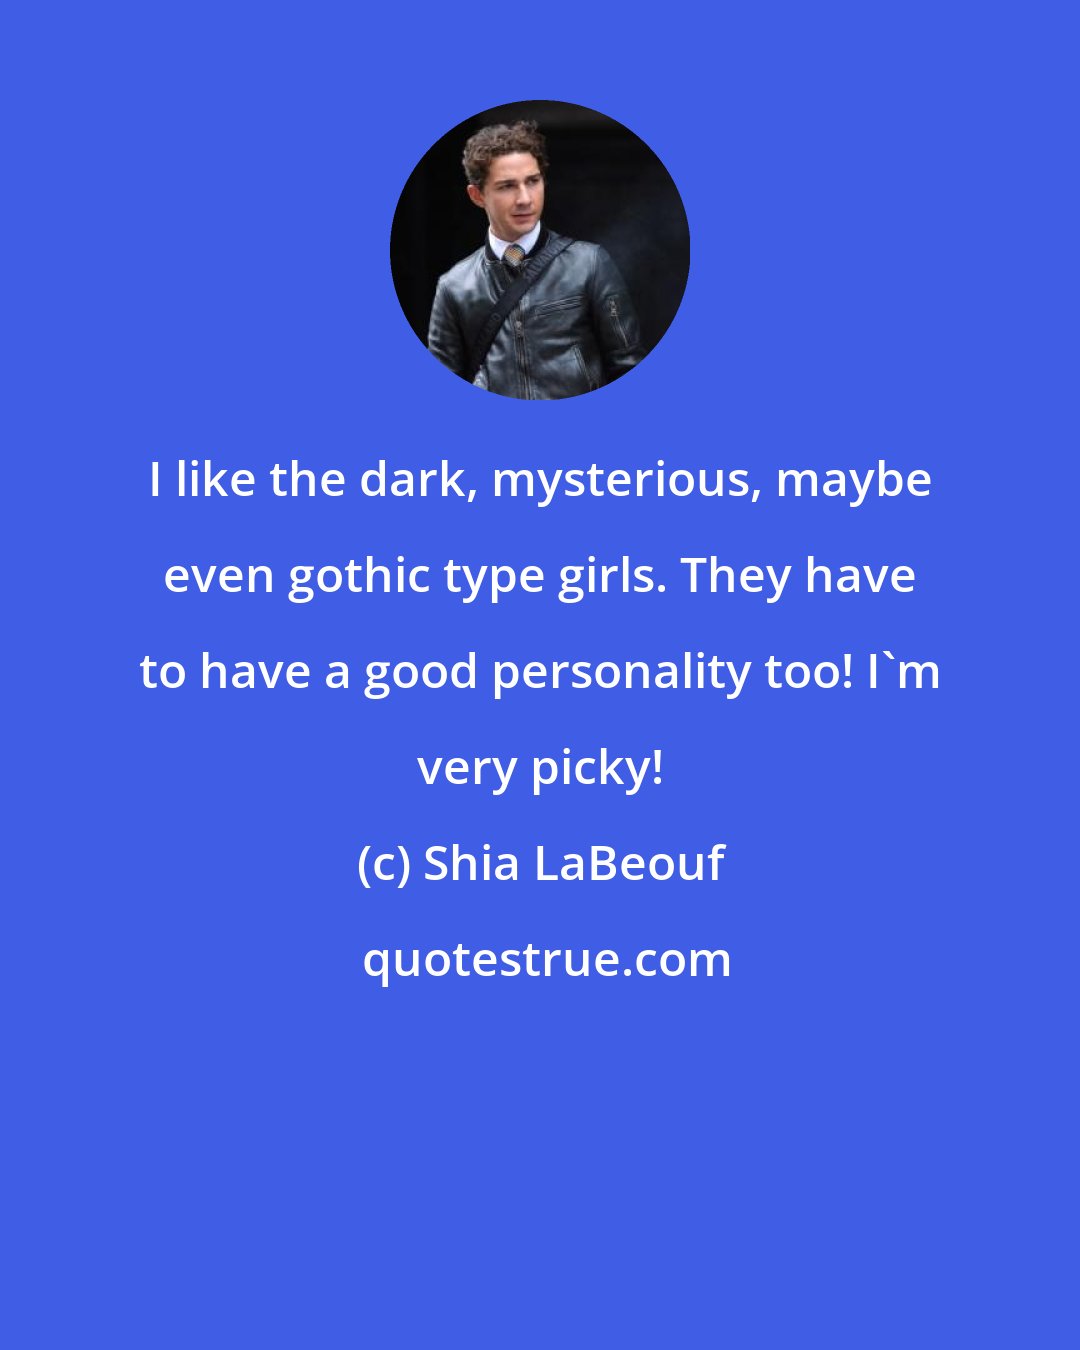 Shia LaBeouf: I like the dark, mysterious, maybe even gothic type girls. They have to have a good personality too! I'm very picky!